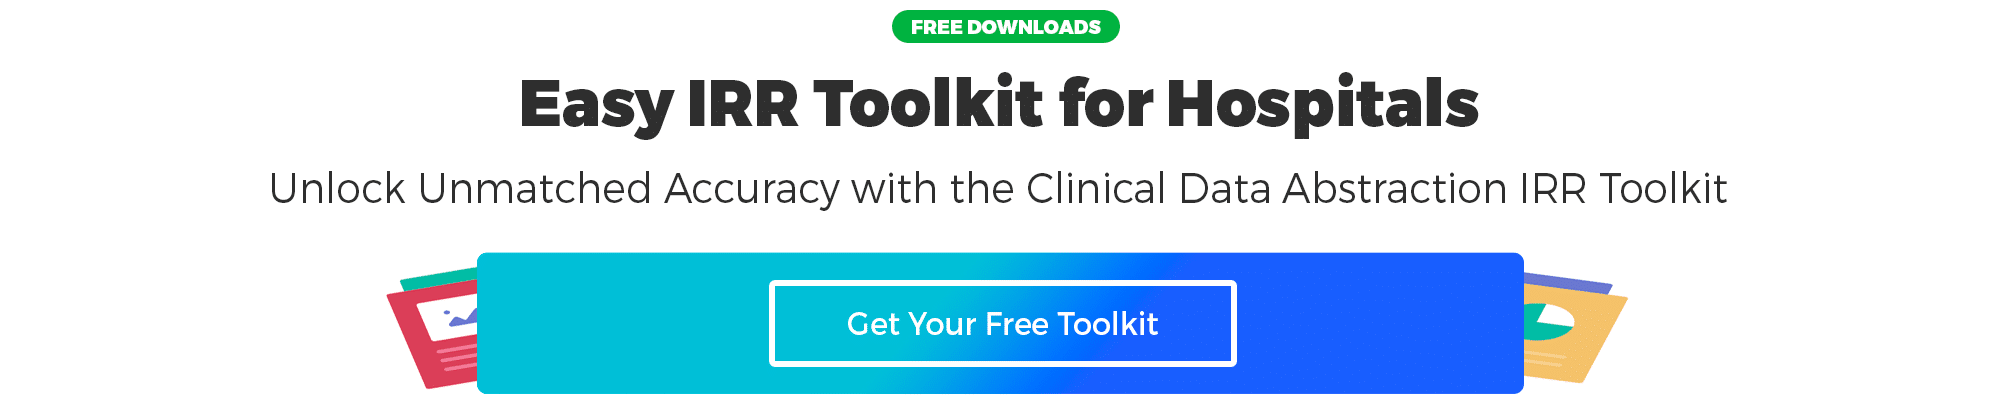 Easy IRR Toolkit for Hospitals